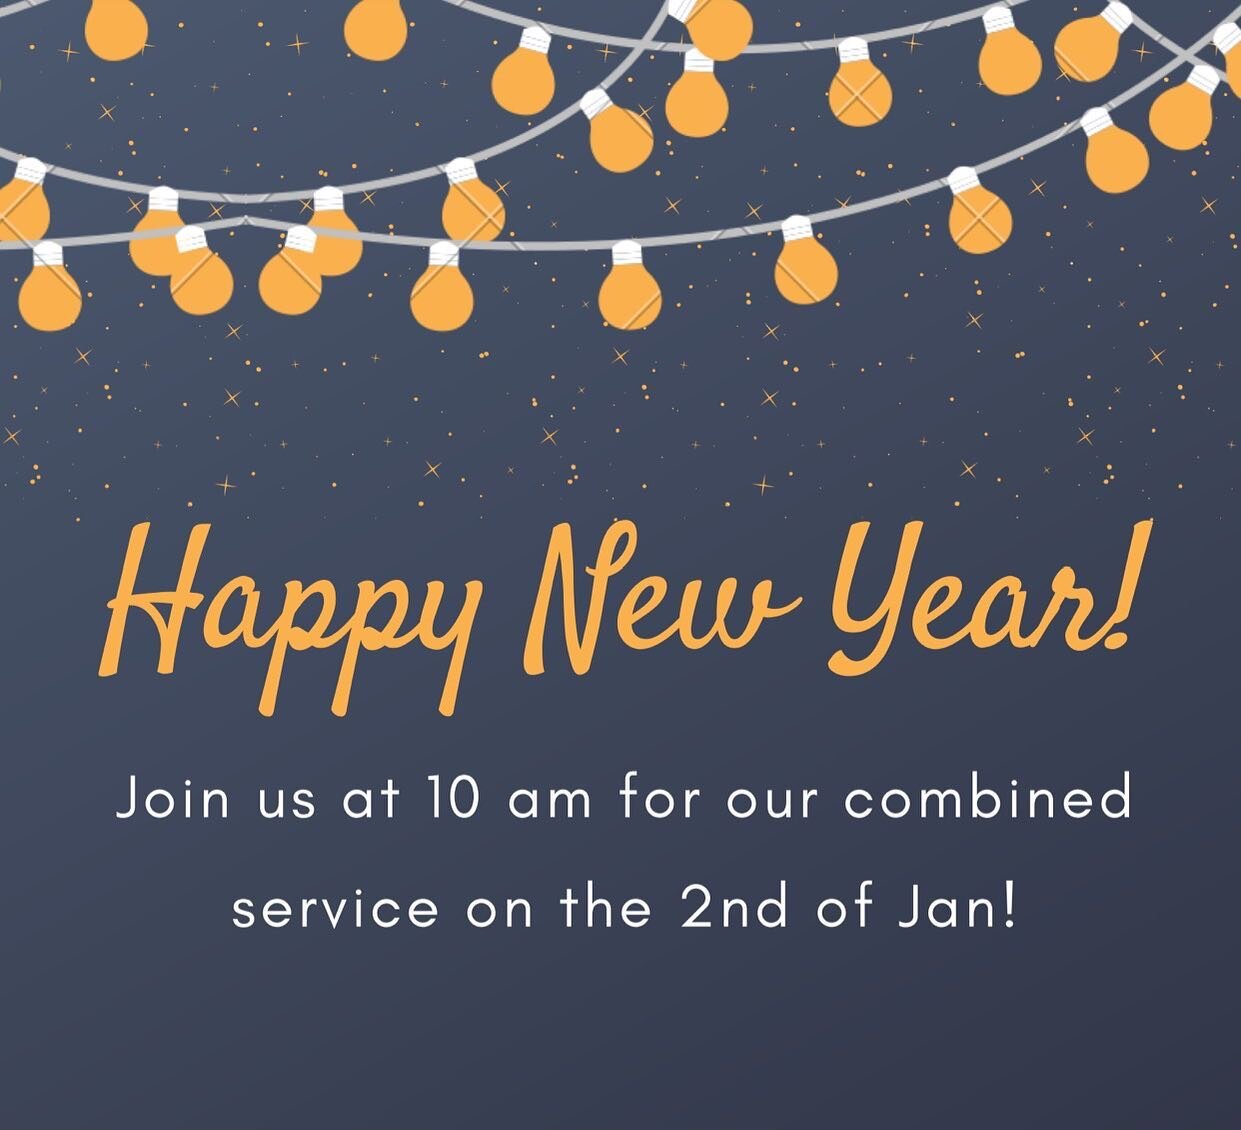 Happy New Year everyone!!! 🥳🥳
A reminder that we will be having a combined service tomorrow at 10 am!